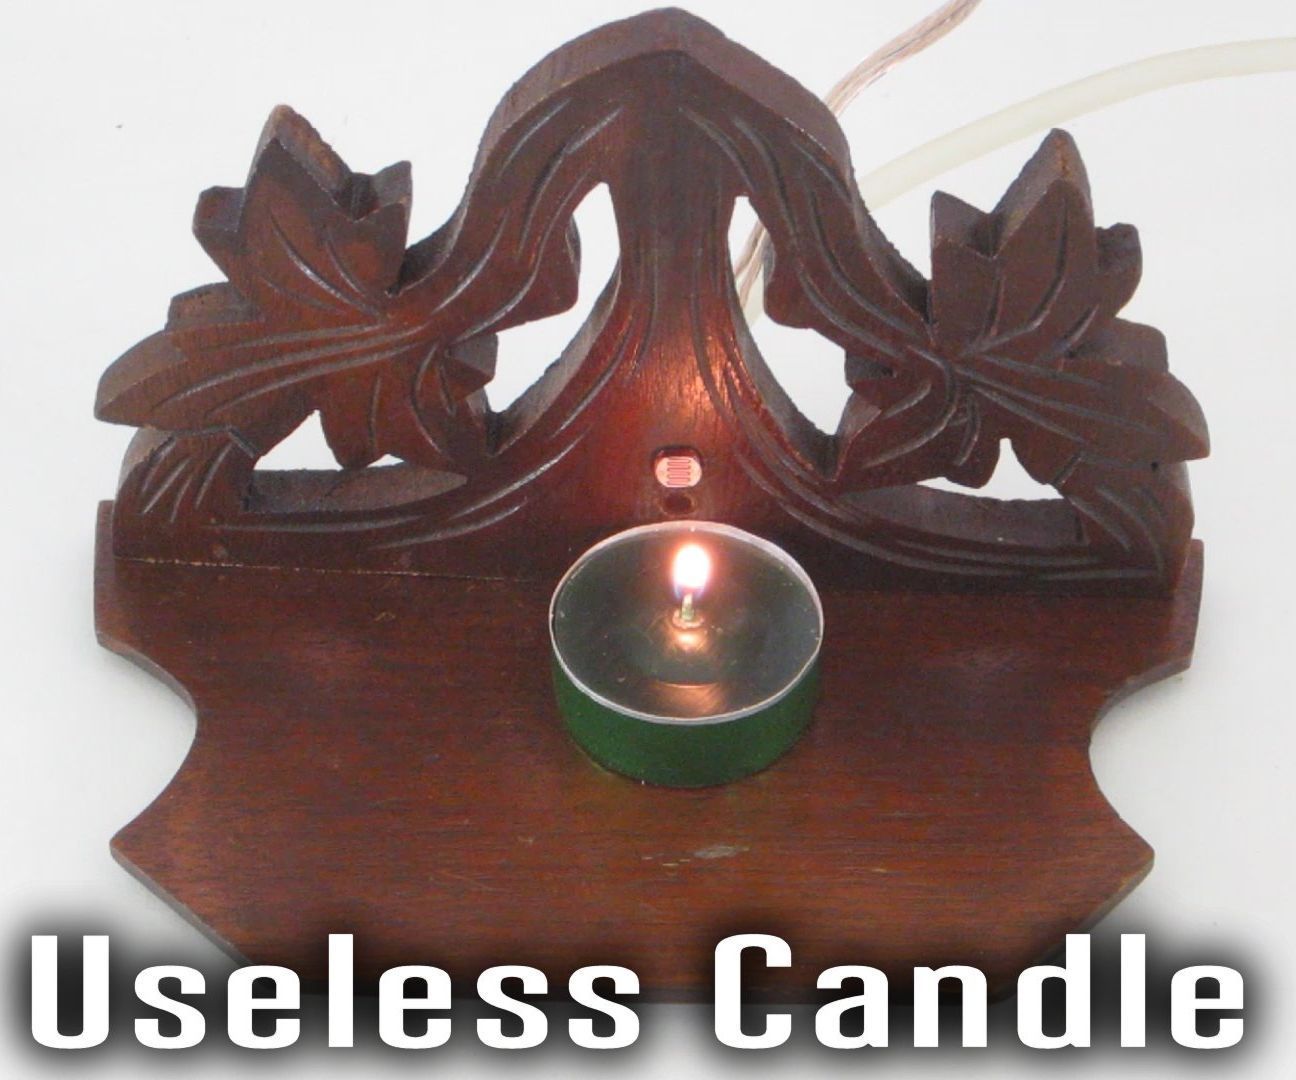 The Useless Candle (A Candle That Blows Itself Out)